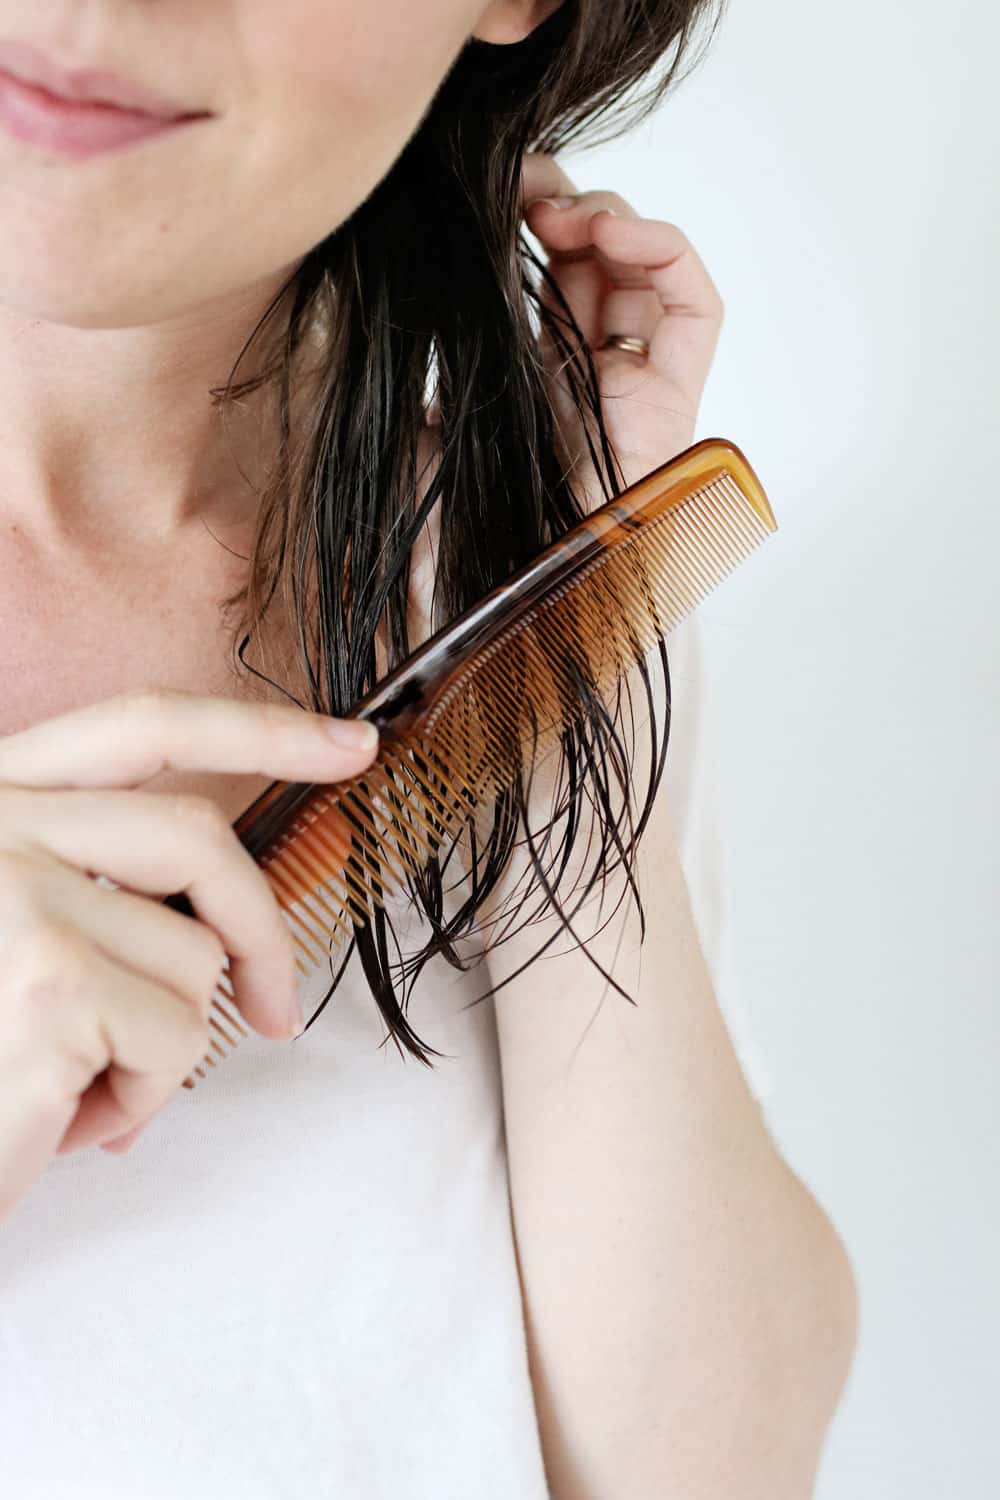 Guide to choosing safe hair products